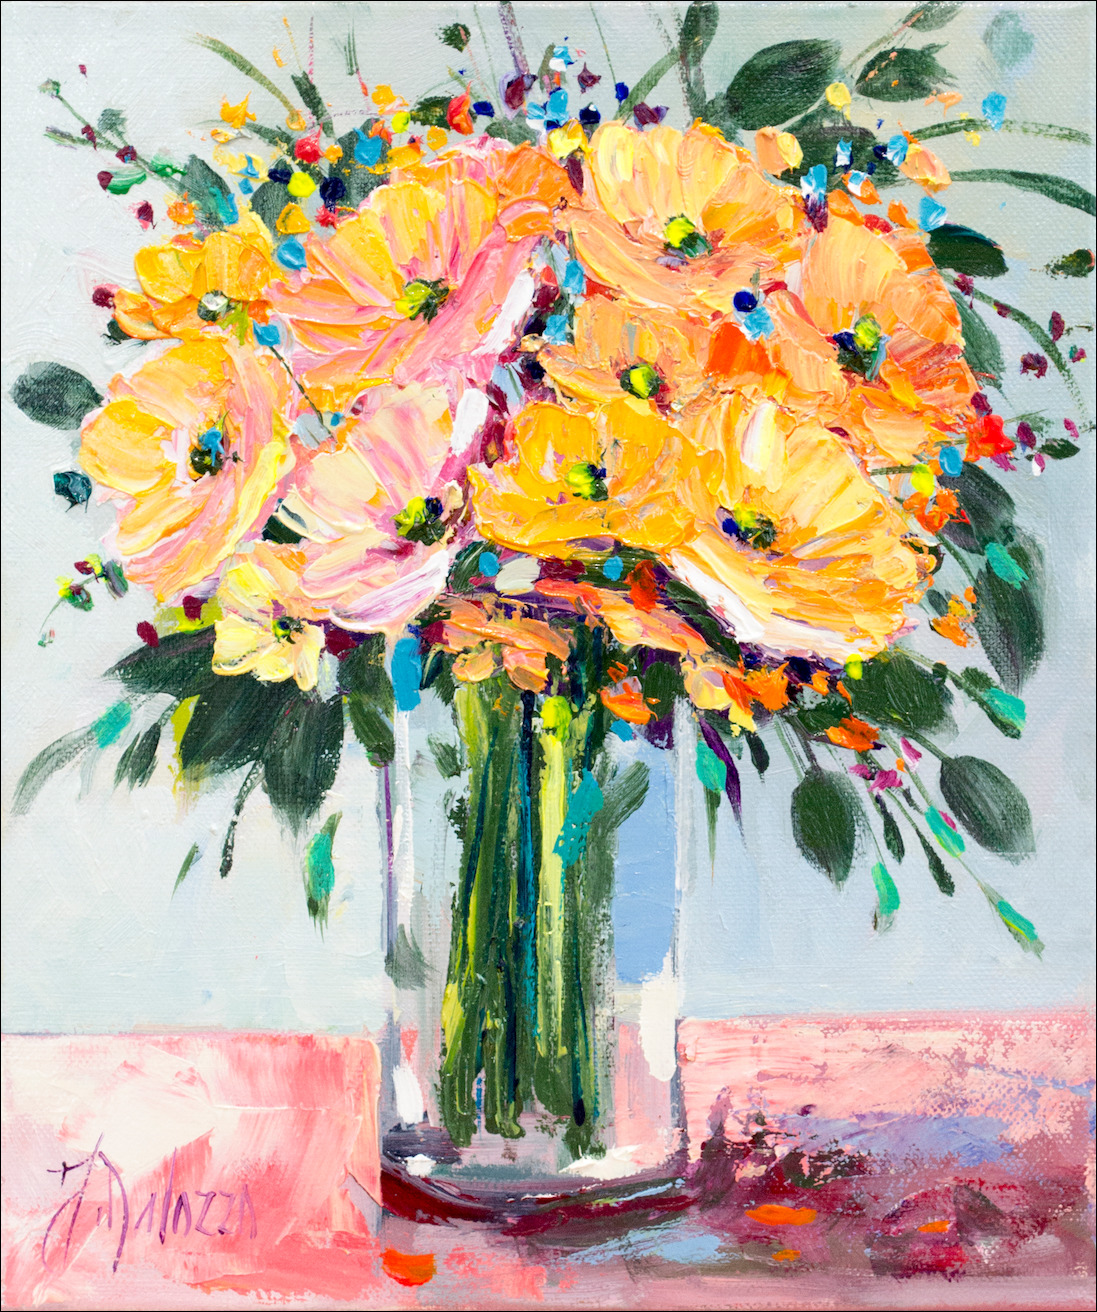 Floral Still Life "Daydreaming Bouquet" Original Artwork by Judith Dalozzo